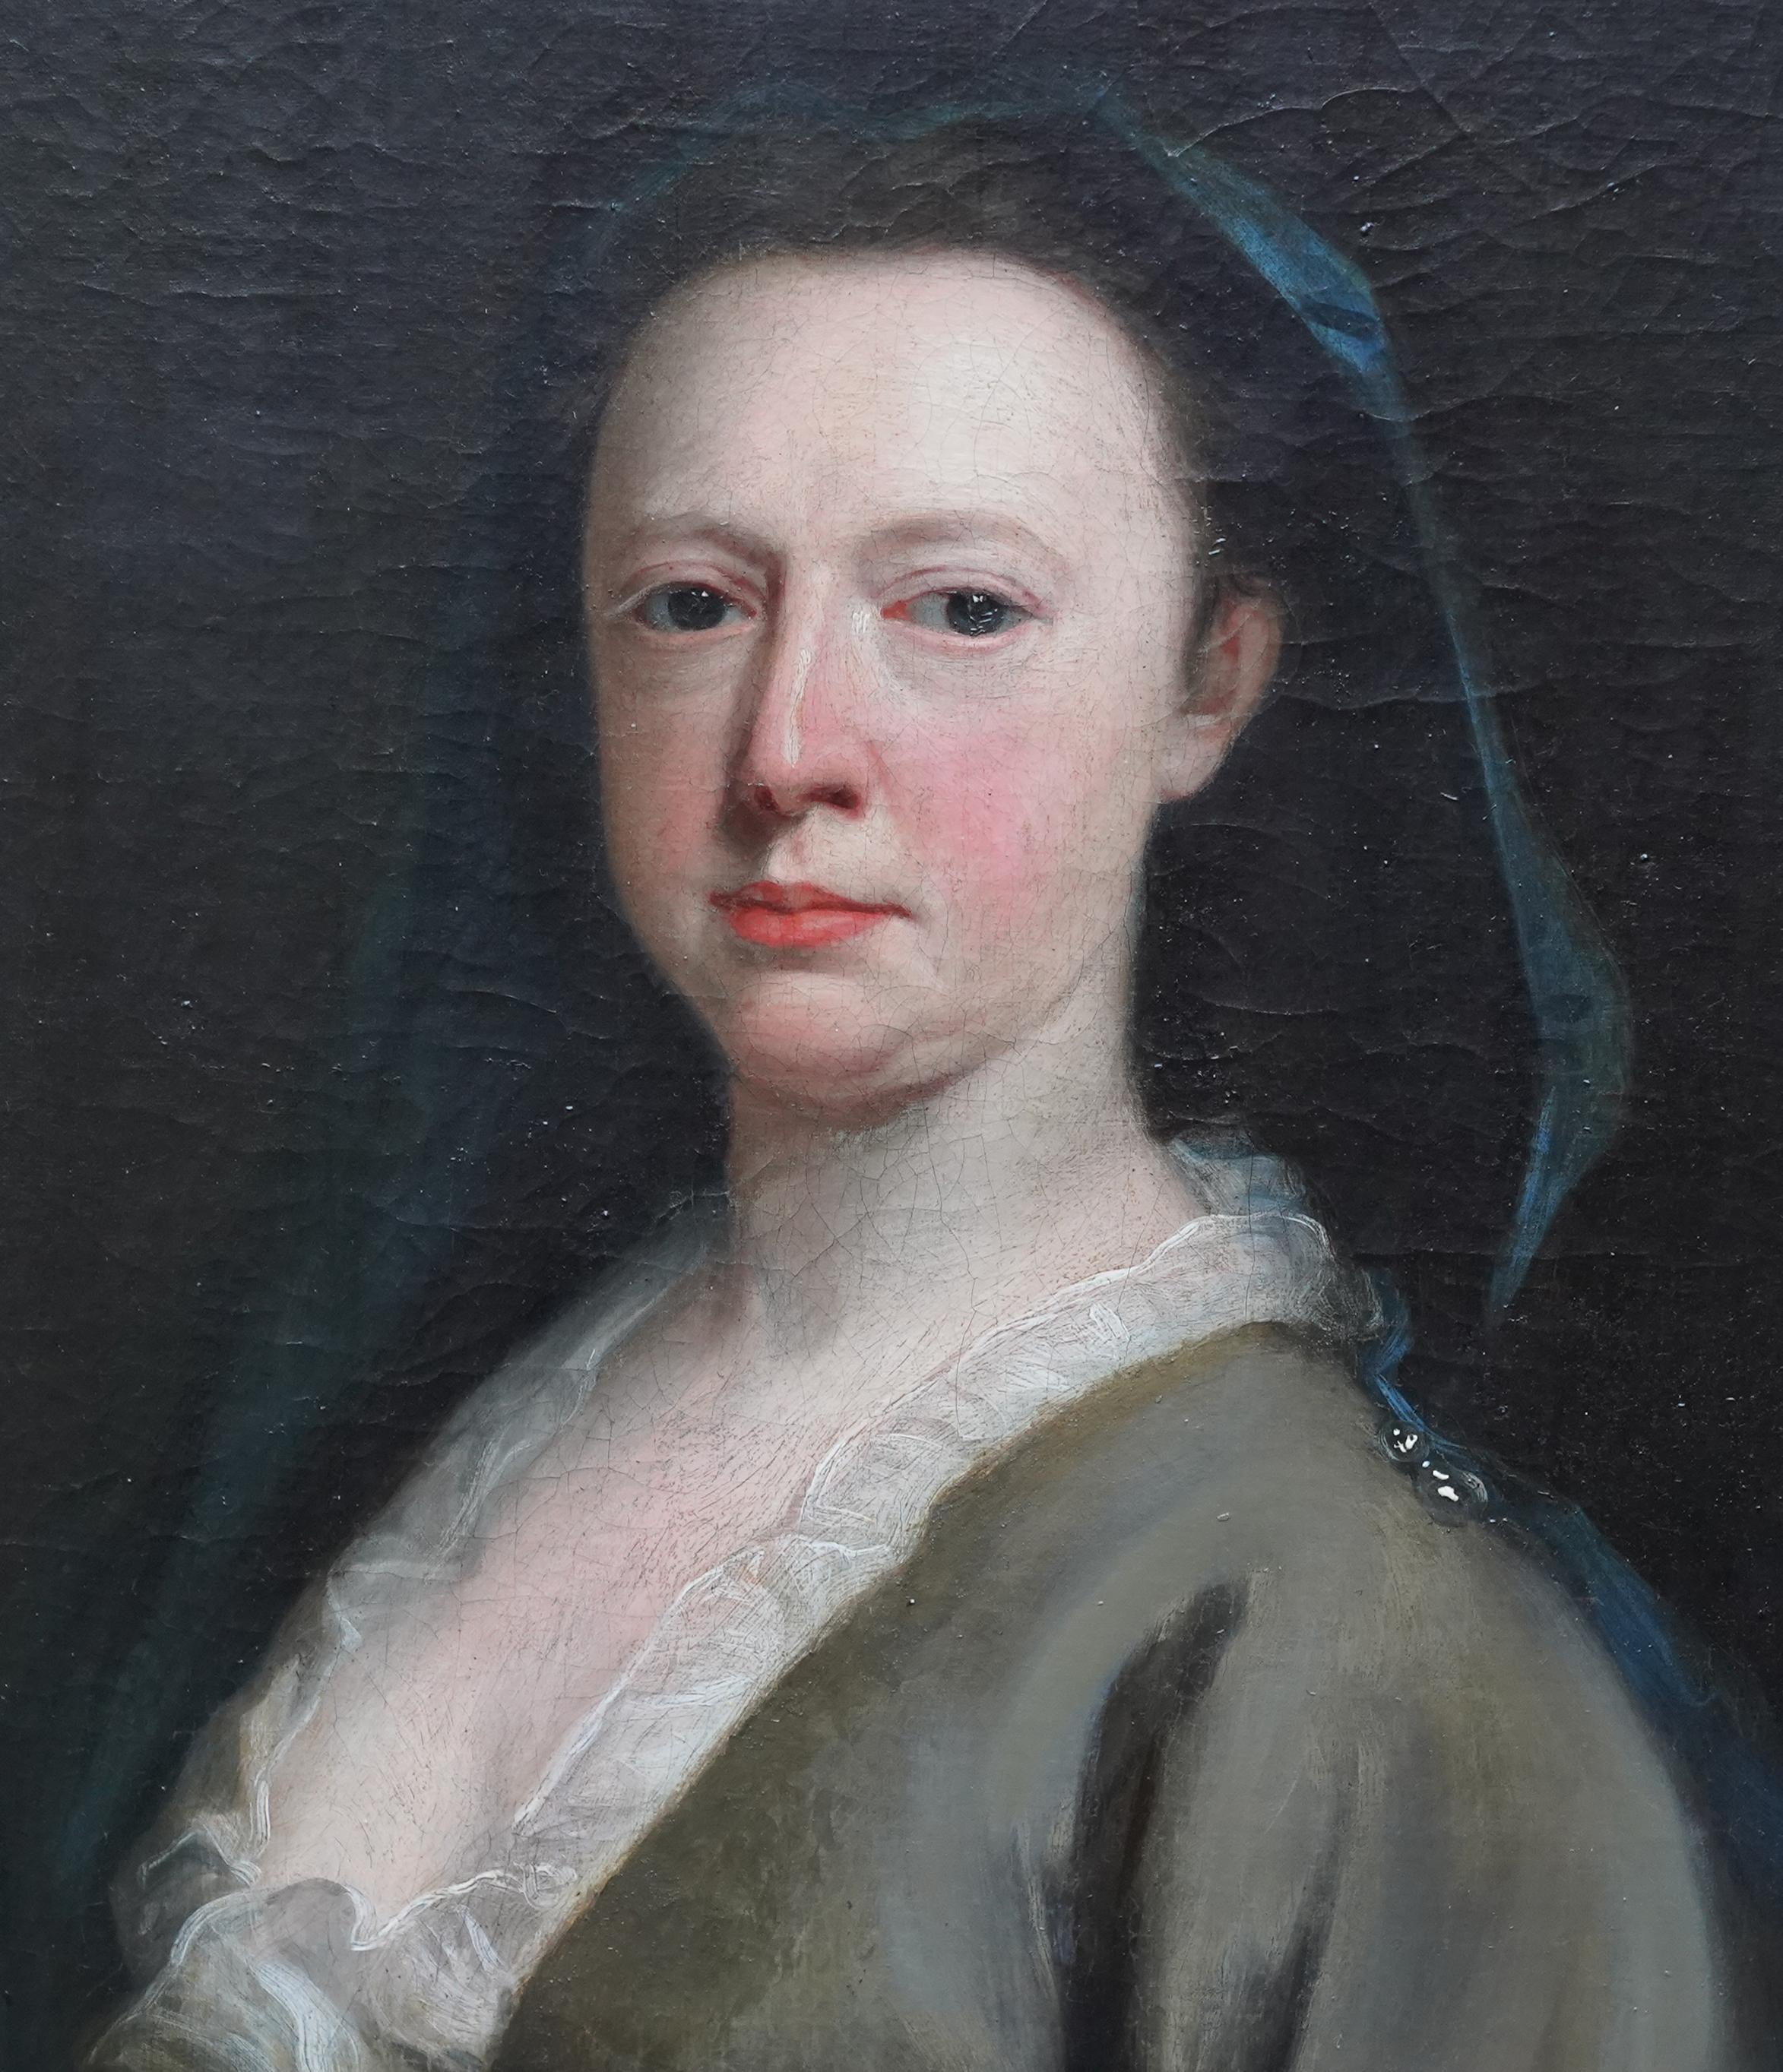 This lovely British Old Master portrait oil painting is attributed to the circle of Sir George Kneller. Painted circa 1680 it is a half length portrait in a feigned oval of a lady in a brown gown with lace neckline. There is lovely detail in her